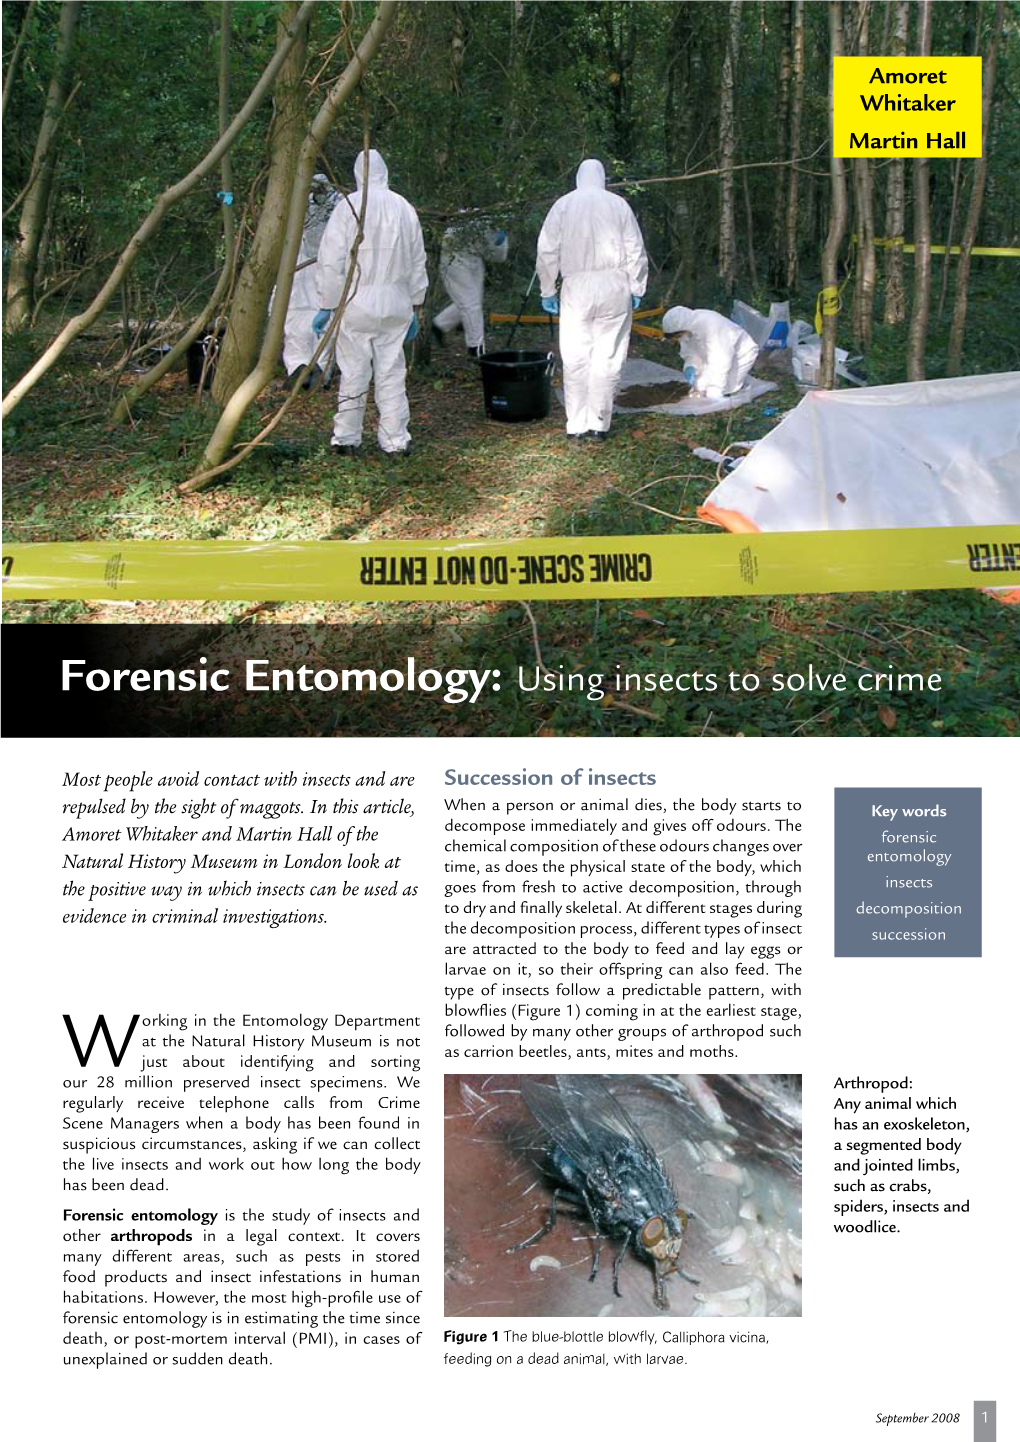 Forensic Entomology: Using Insects to Solve Crime